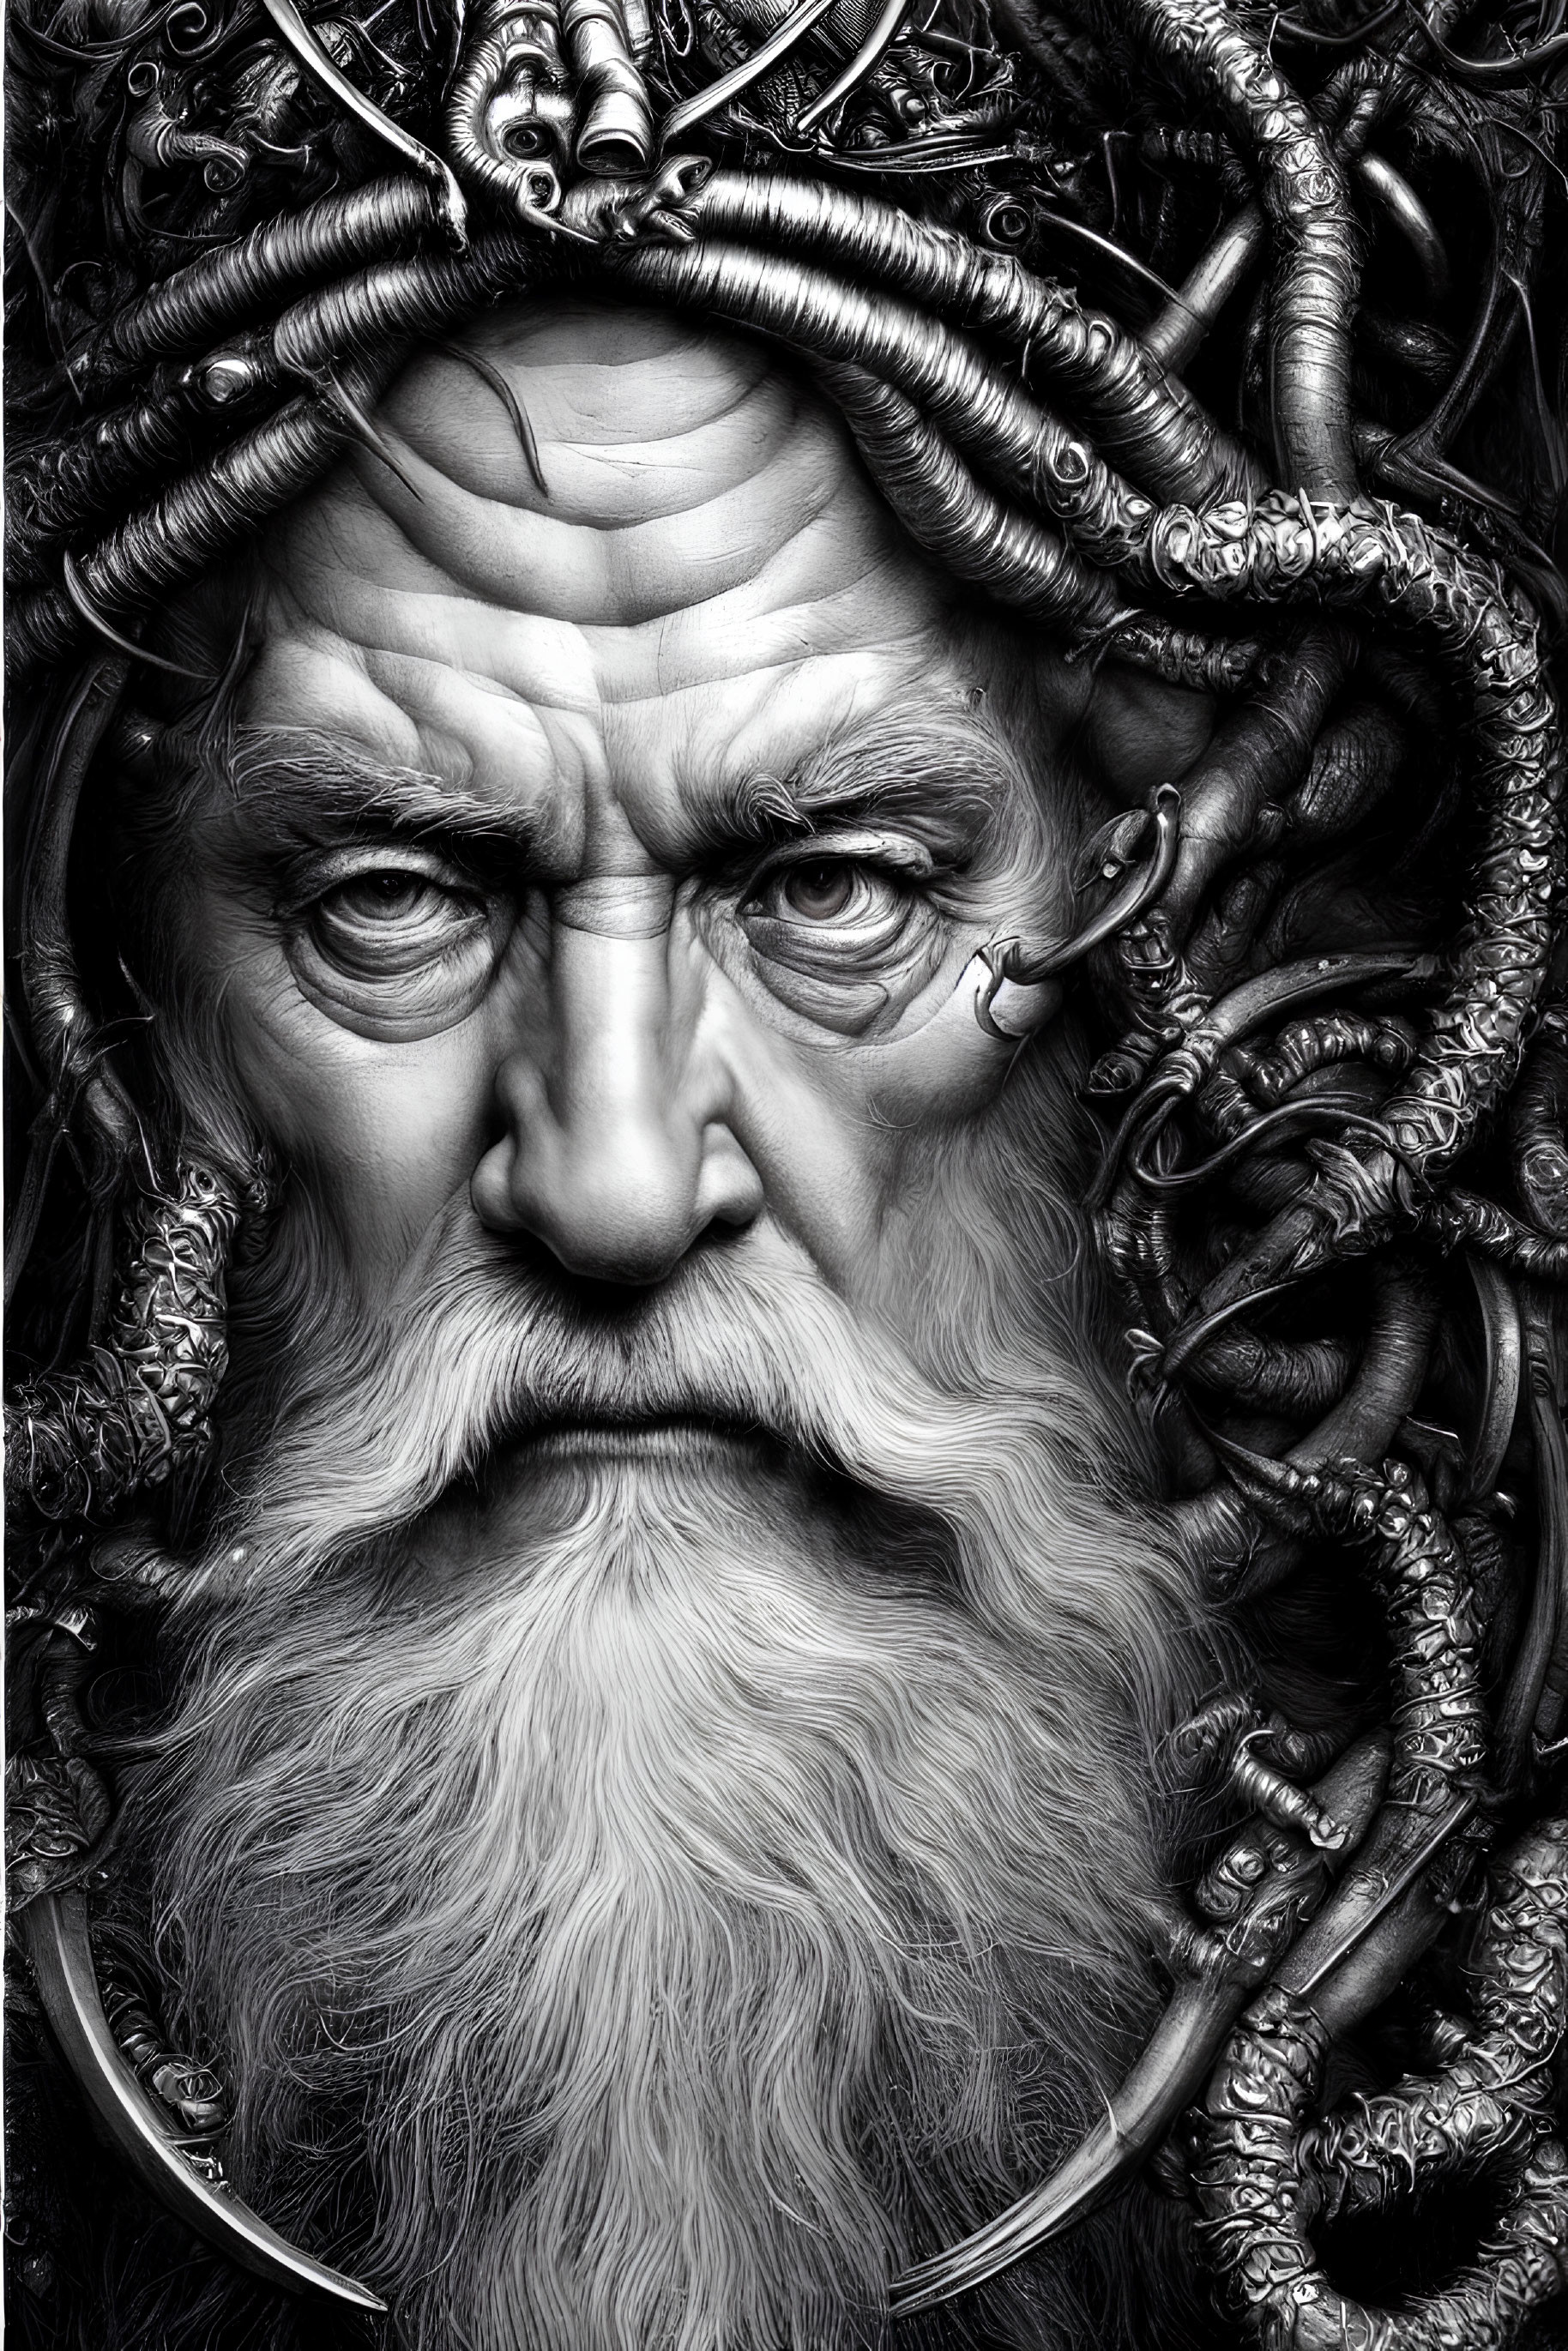 Monochrome portrait featuring older man with beard and intricate snake-like designs